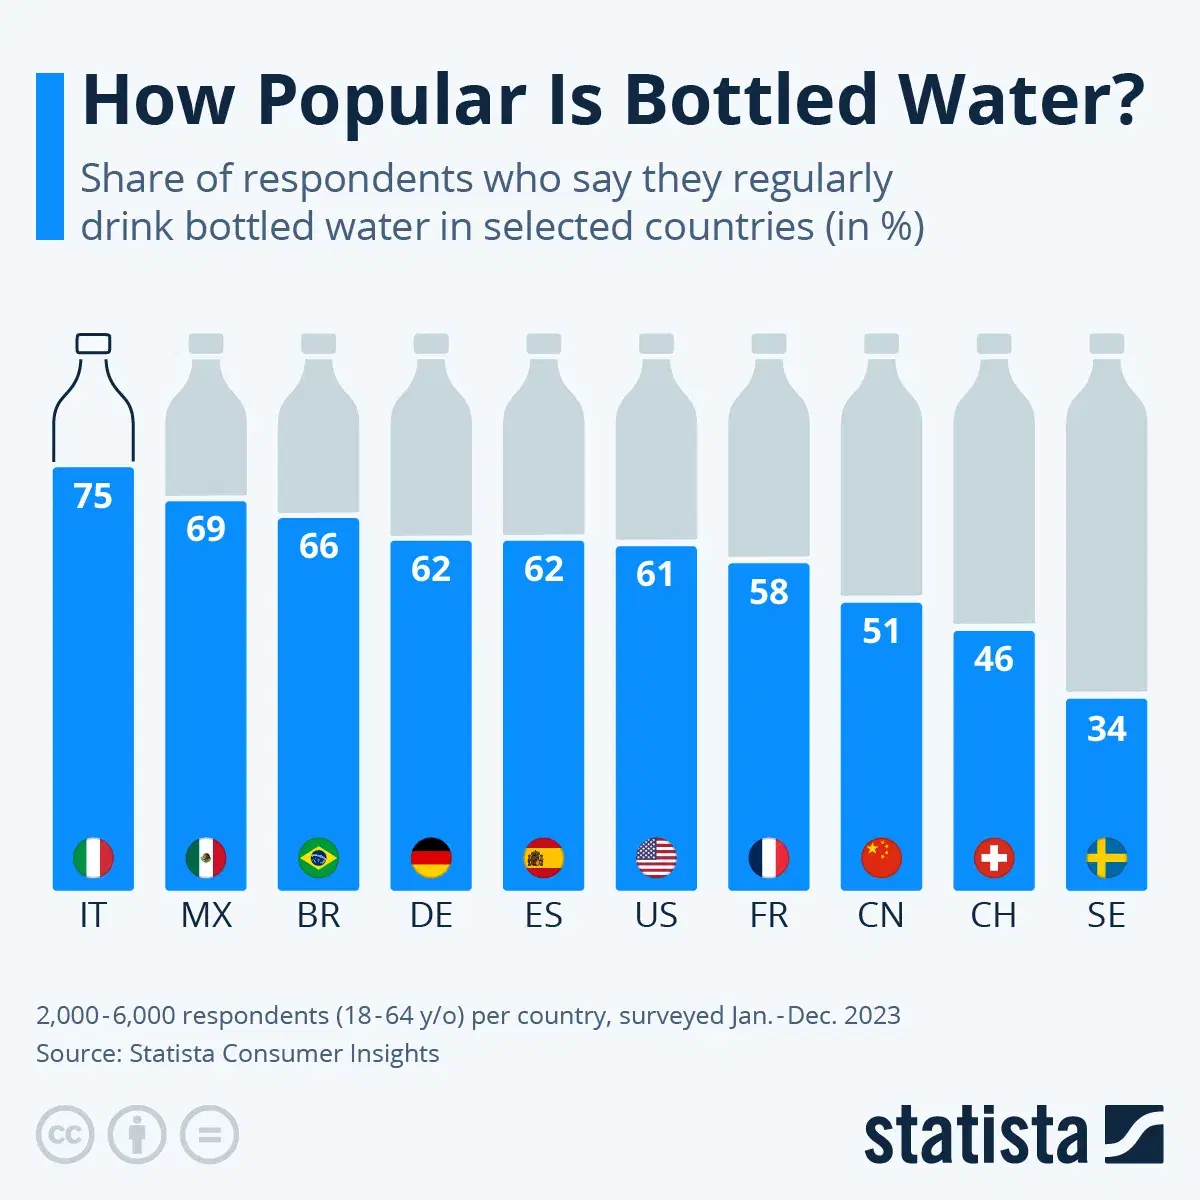 How Popular Is Bottled Water Around the World?